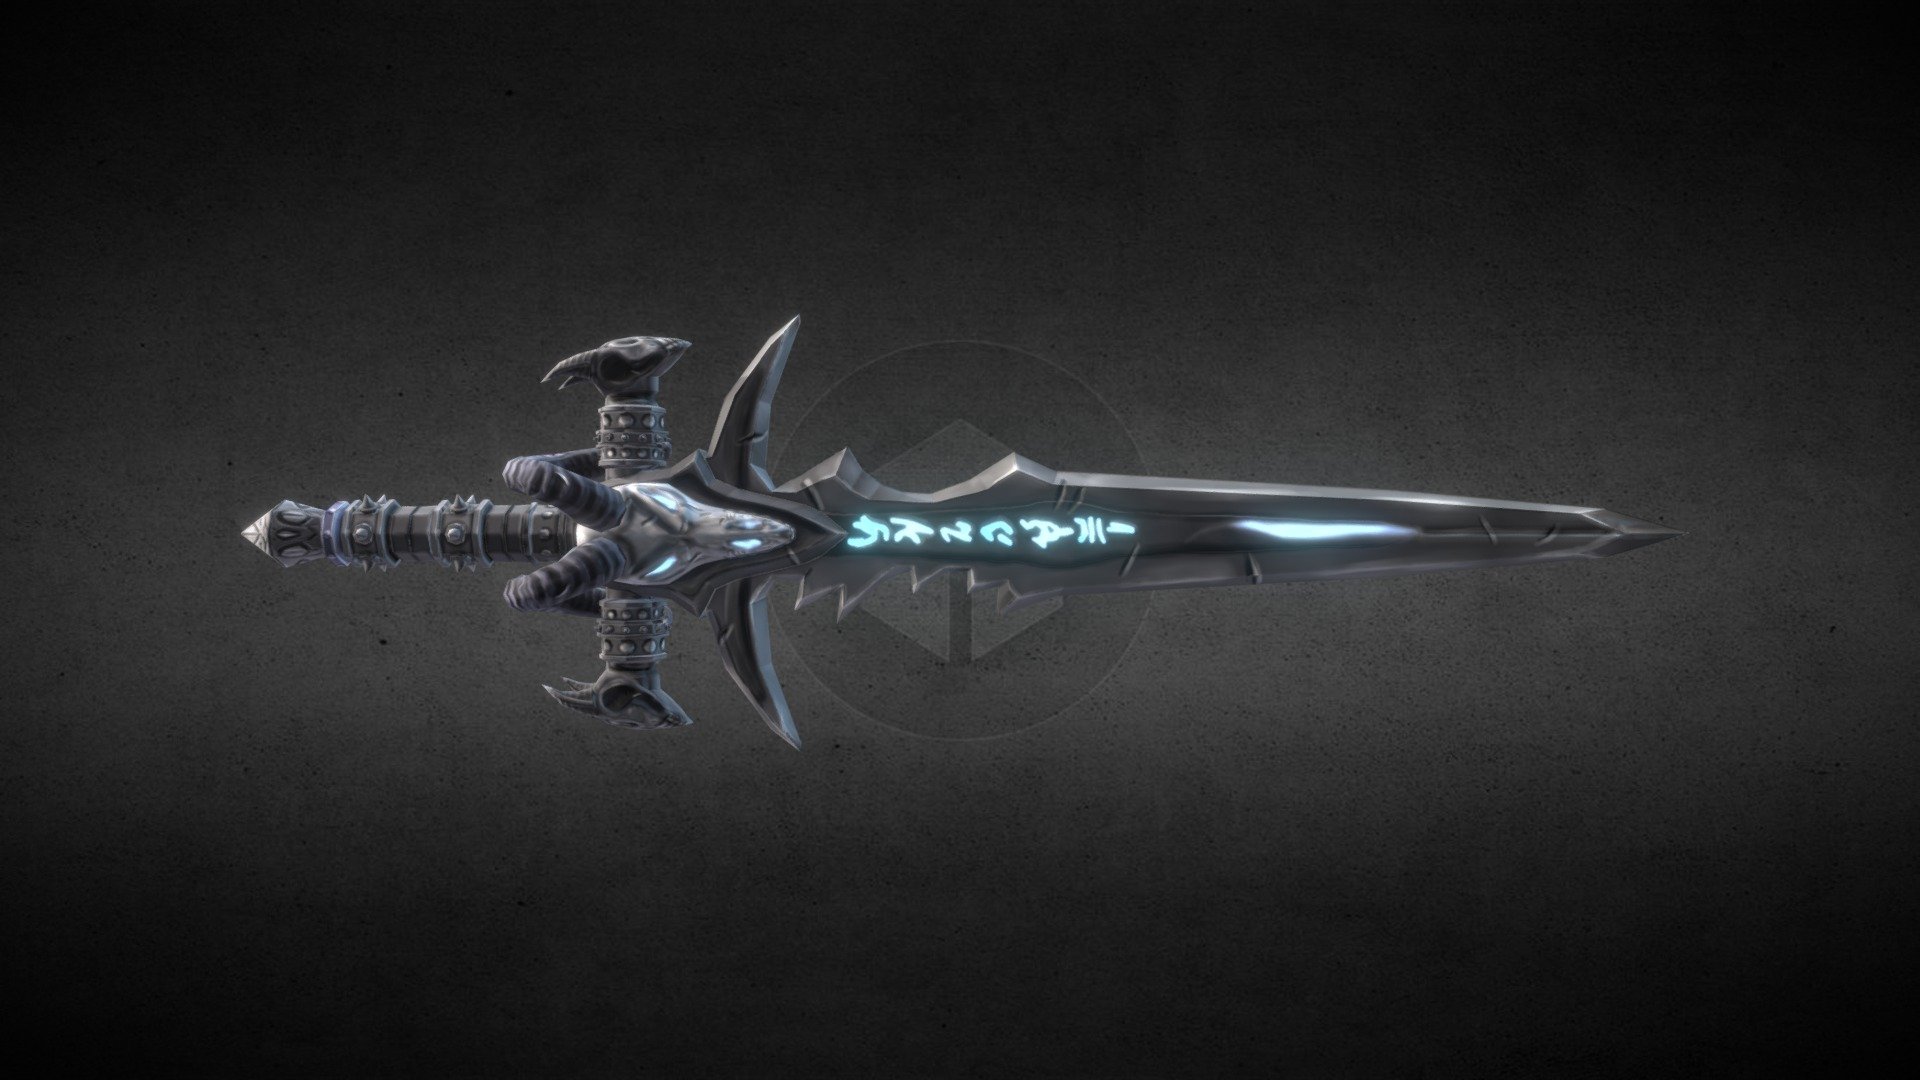 Frostmourne the Legendary Sword of Warcraft 3 ready for a game engine it has 4862 verts 4542 polys and 9044 tris and the textures are 2048 x 2048 and are Diffuse, Normal, Specular and Emissive if you need game assets I can do commission works 3d model